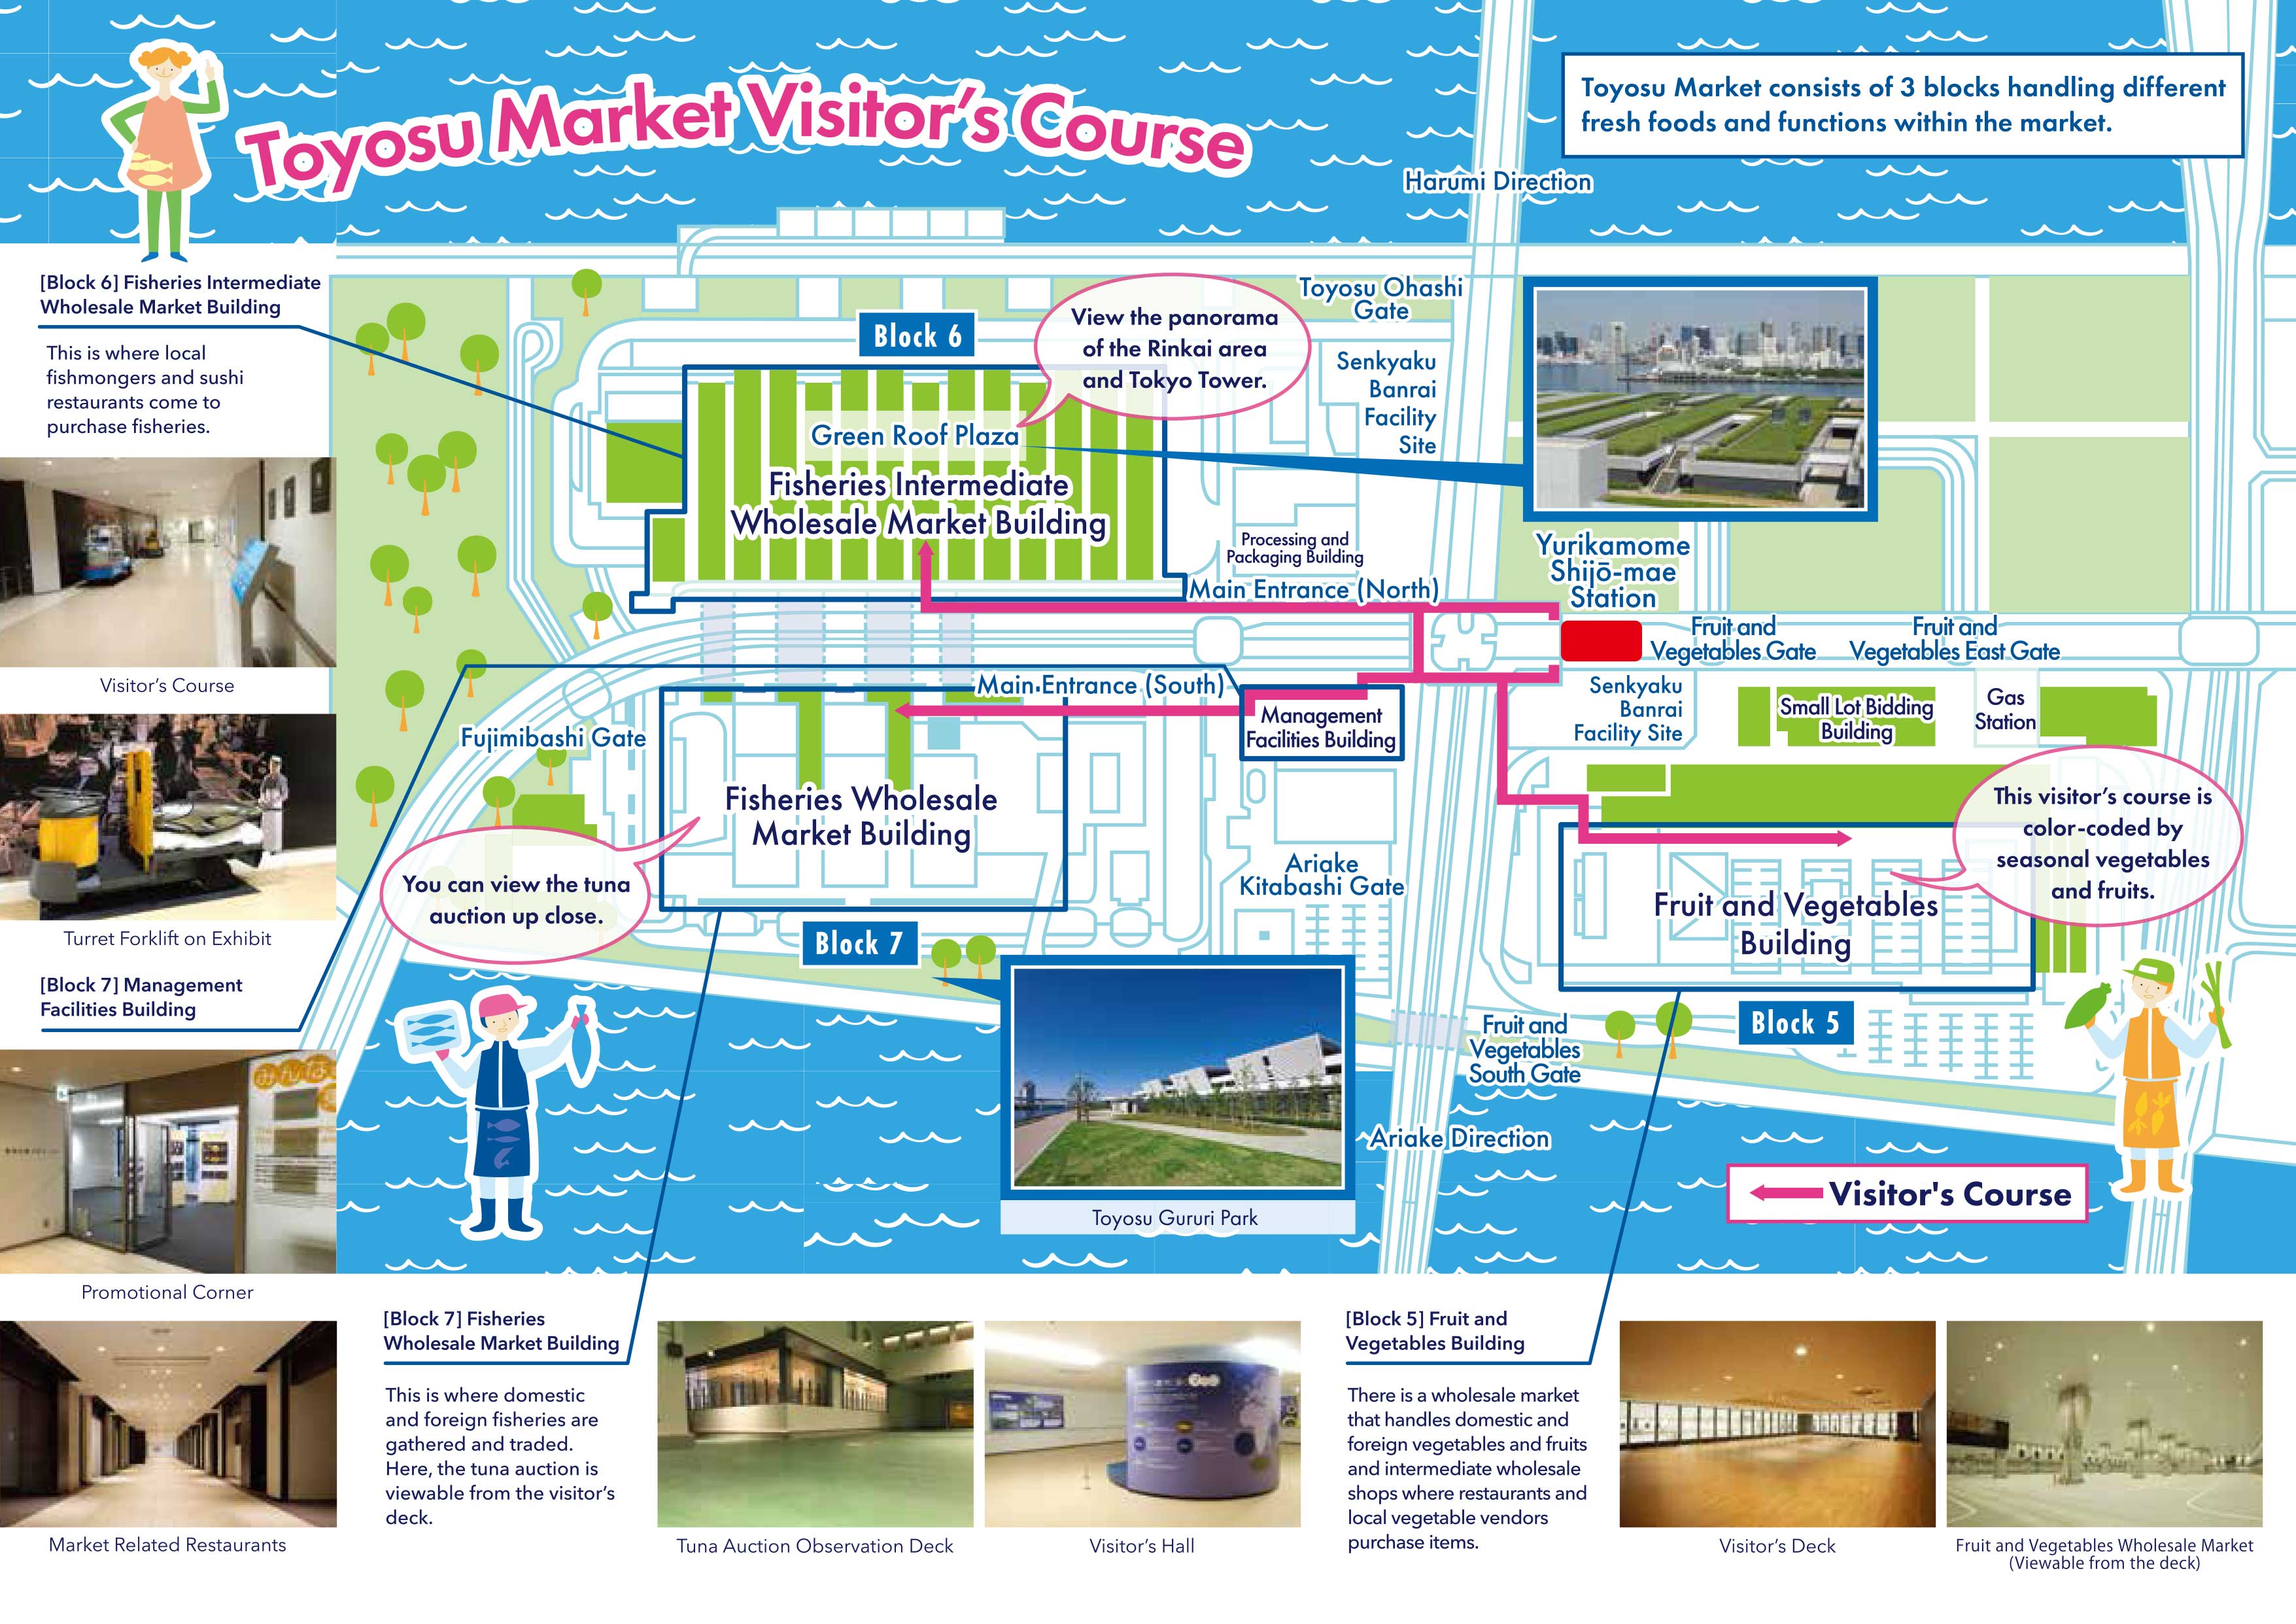 The official website provides this very basic map of Toyosu Market. There are three blocks/buildings all connected to each other and to Shijo-mae Station via pedestrian overpasses.
The red lines on this map show the pedestrian overpass to each block. All three buildings have a long tourist corridor with picture windows to see inside the market.

When the market is open (closed on Sun.), tourists can tour the three Toyosu Market buildings from 5 am to 5 pm. However, there's not much market action after late morning.

Besides the markets, there are sushi restaurants. The problem with this map is that it doesn't show where the restaurants are. They are in Blocks 6 and 7. Very crowded though.

Block 7 is where the tuna auctions are held, but the public won't be able to see the auction area until next Jan. But if you come here by 6 am or so, you should be able to see some tuna being hauled away on the floor. This block also has some restaurants.

Block 6 is the largest building of the three. This is where the sold tuna is carved up. This building also has a large sushi restaurant area that is not indicated on this map. The upper floor also has little shops (Uogashi Yokocho Market) for people who work at the market. They sell knives, tea, etc., and also sell to the public, but the shops close by 2 pm or so.

Block 5 is the fruit and vegetable market. Least crowded. No restaurants inside.
Keywords: tokyo koto-ku ward toyosu market